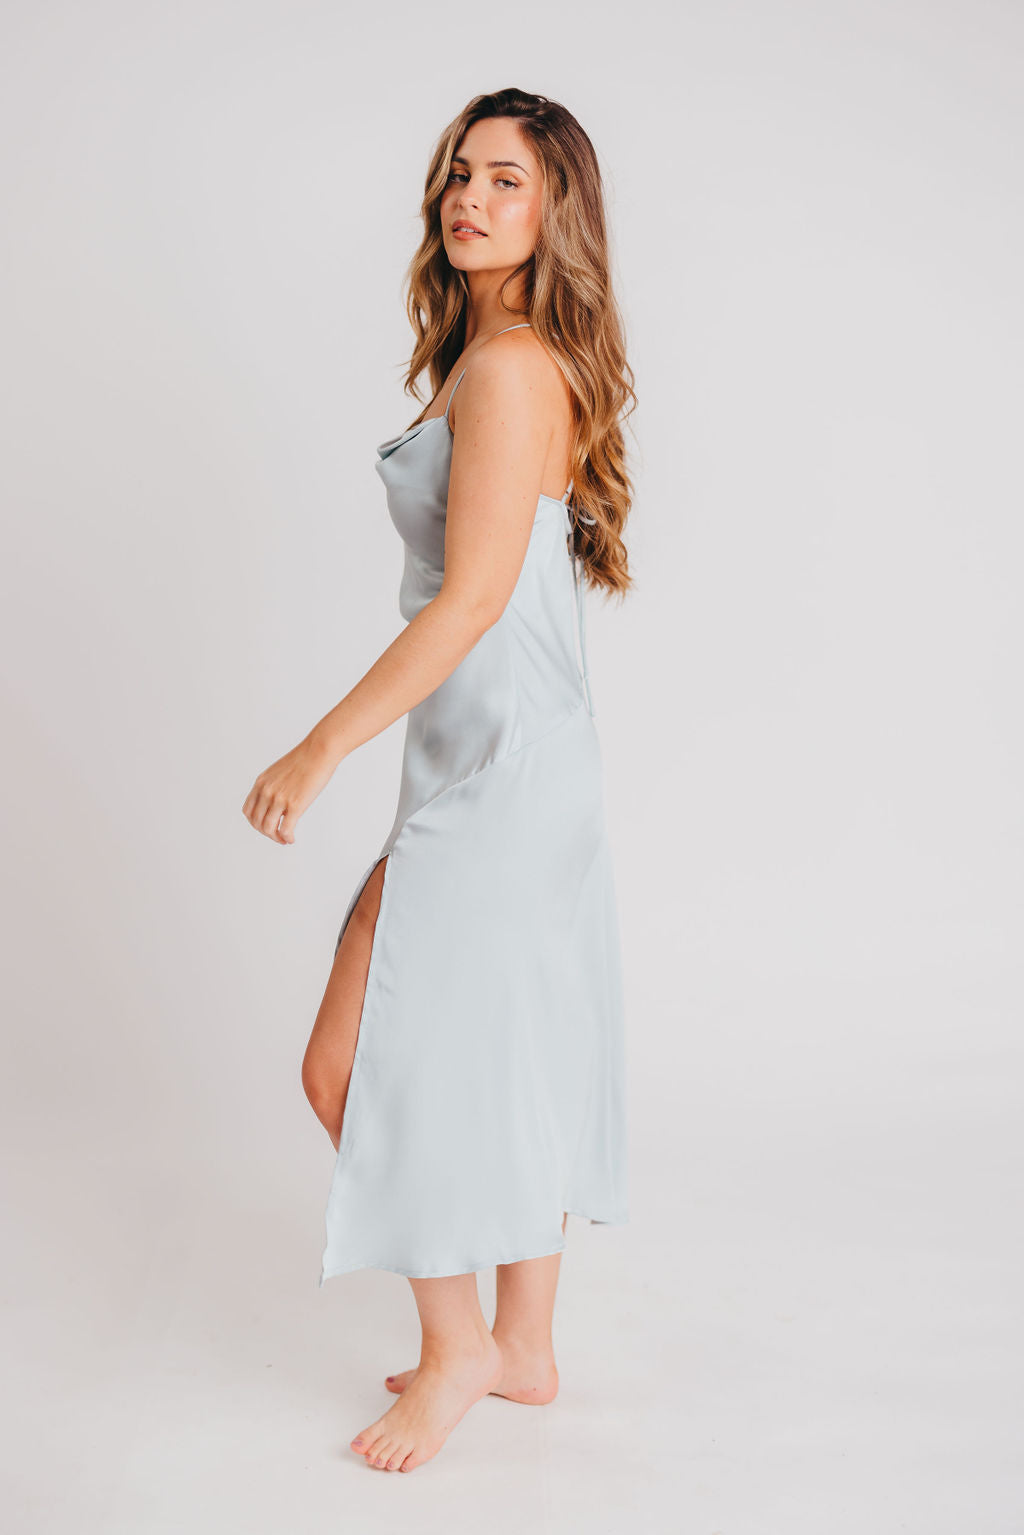 Gaia Dress by ASTR in Light Sage - Extended Sizes